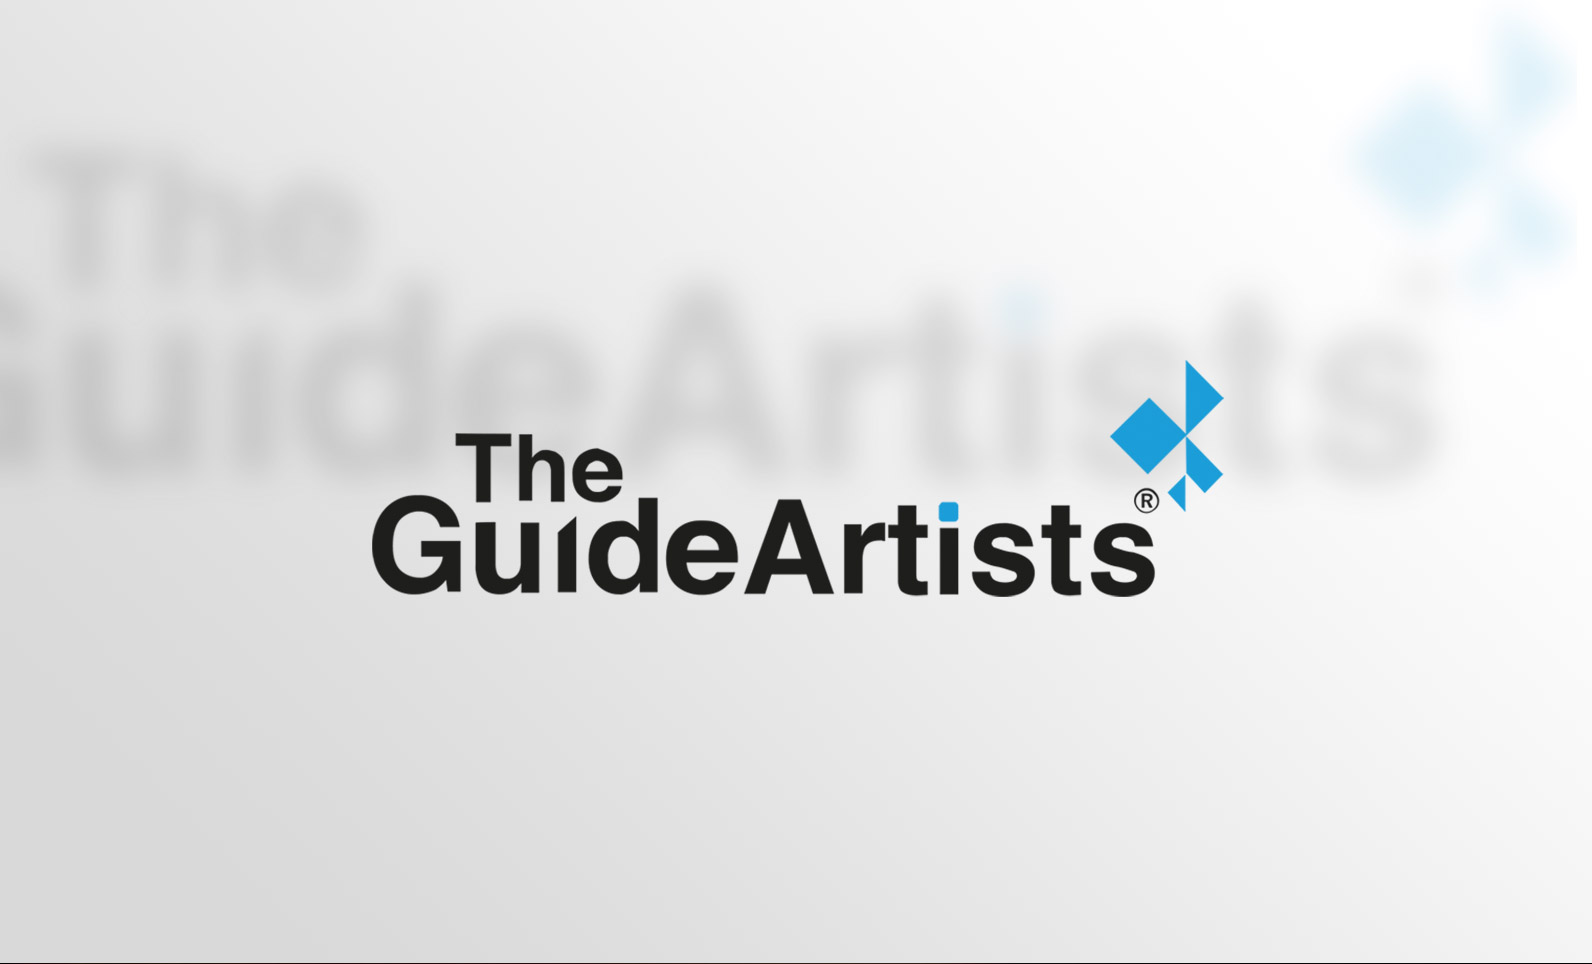 Motion graphics - TheGuideArtist